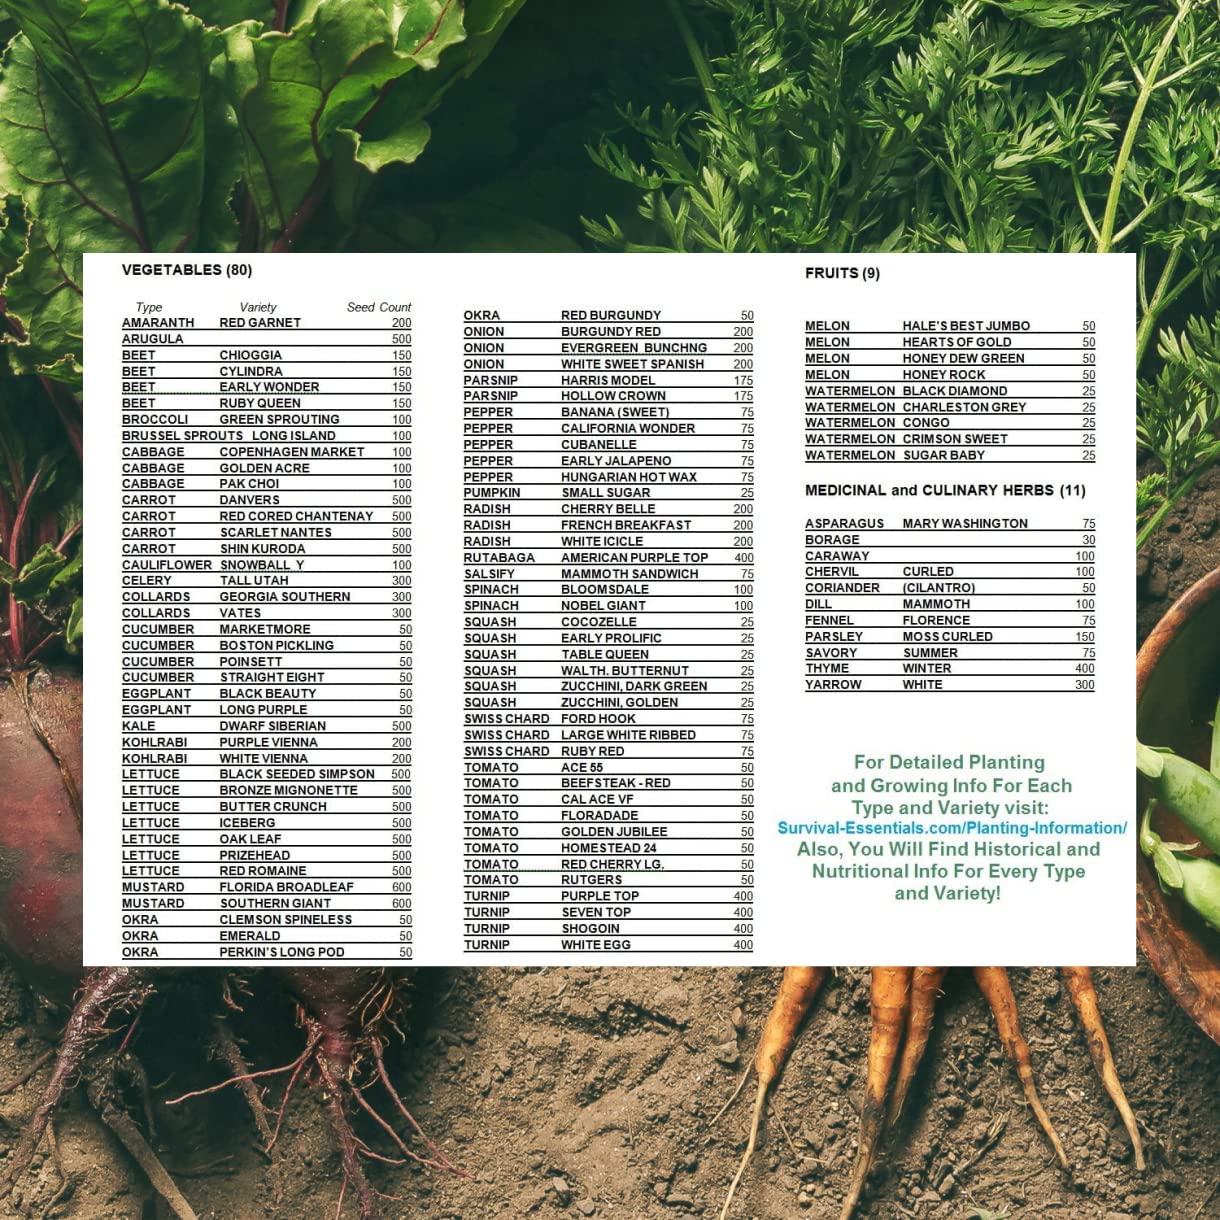 Image displaying a comprehensive list of vegetable and fruit seeds, alongside medicinal and culinary herb seeds, offering a diverse selection for gardening enthusiasts interested in cultivating a variety of edible and medicinal plants